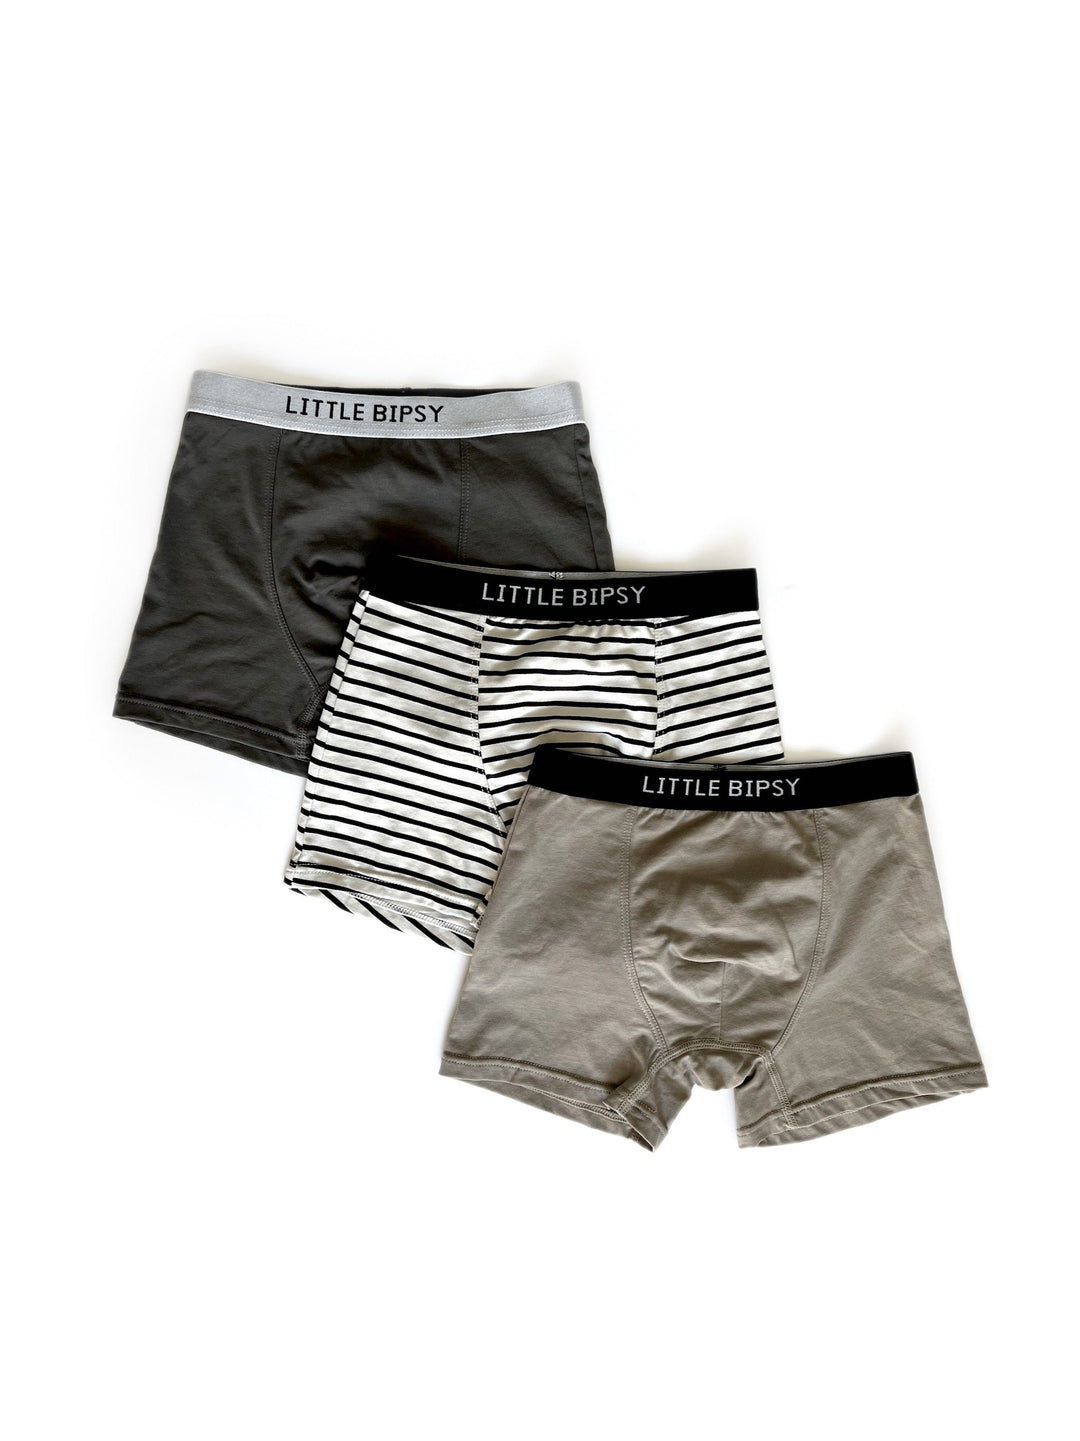 Little Bipsy Pewter Mix boxer brief 3 pack against white backdrop